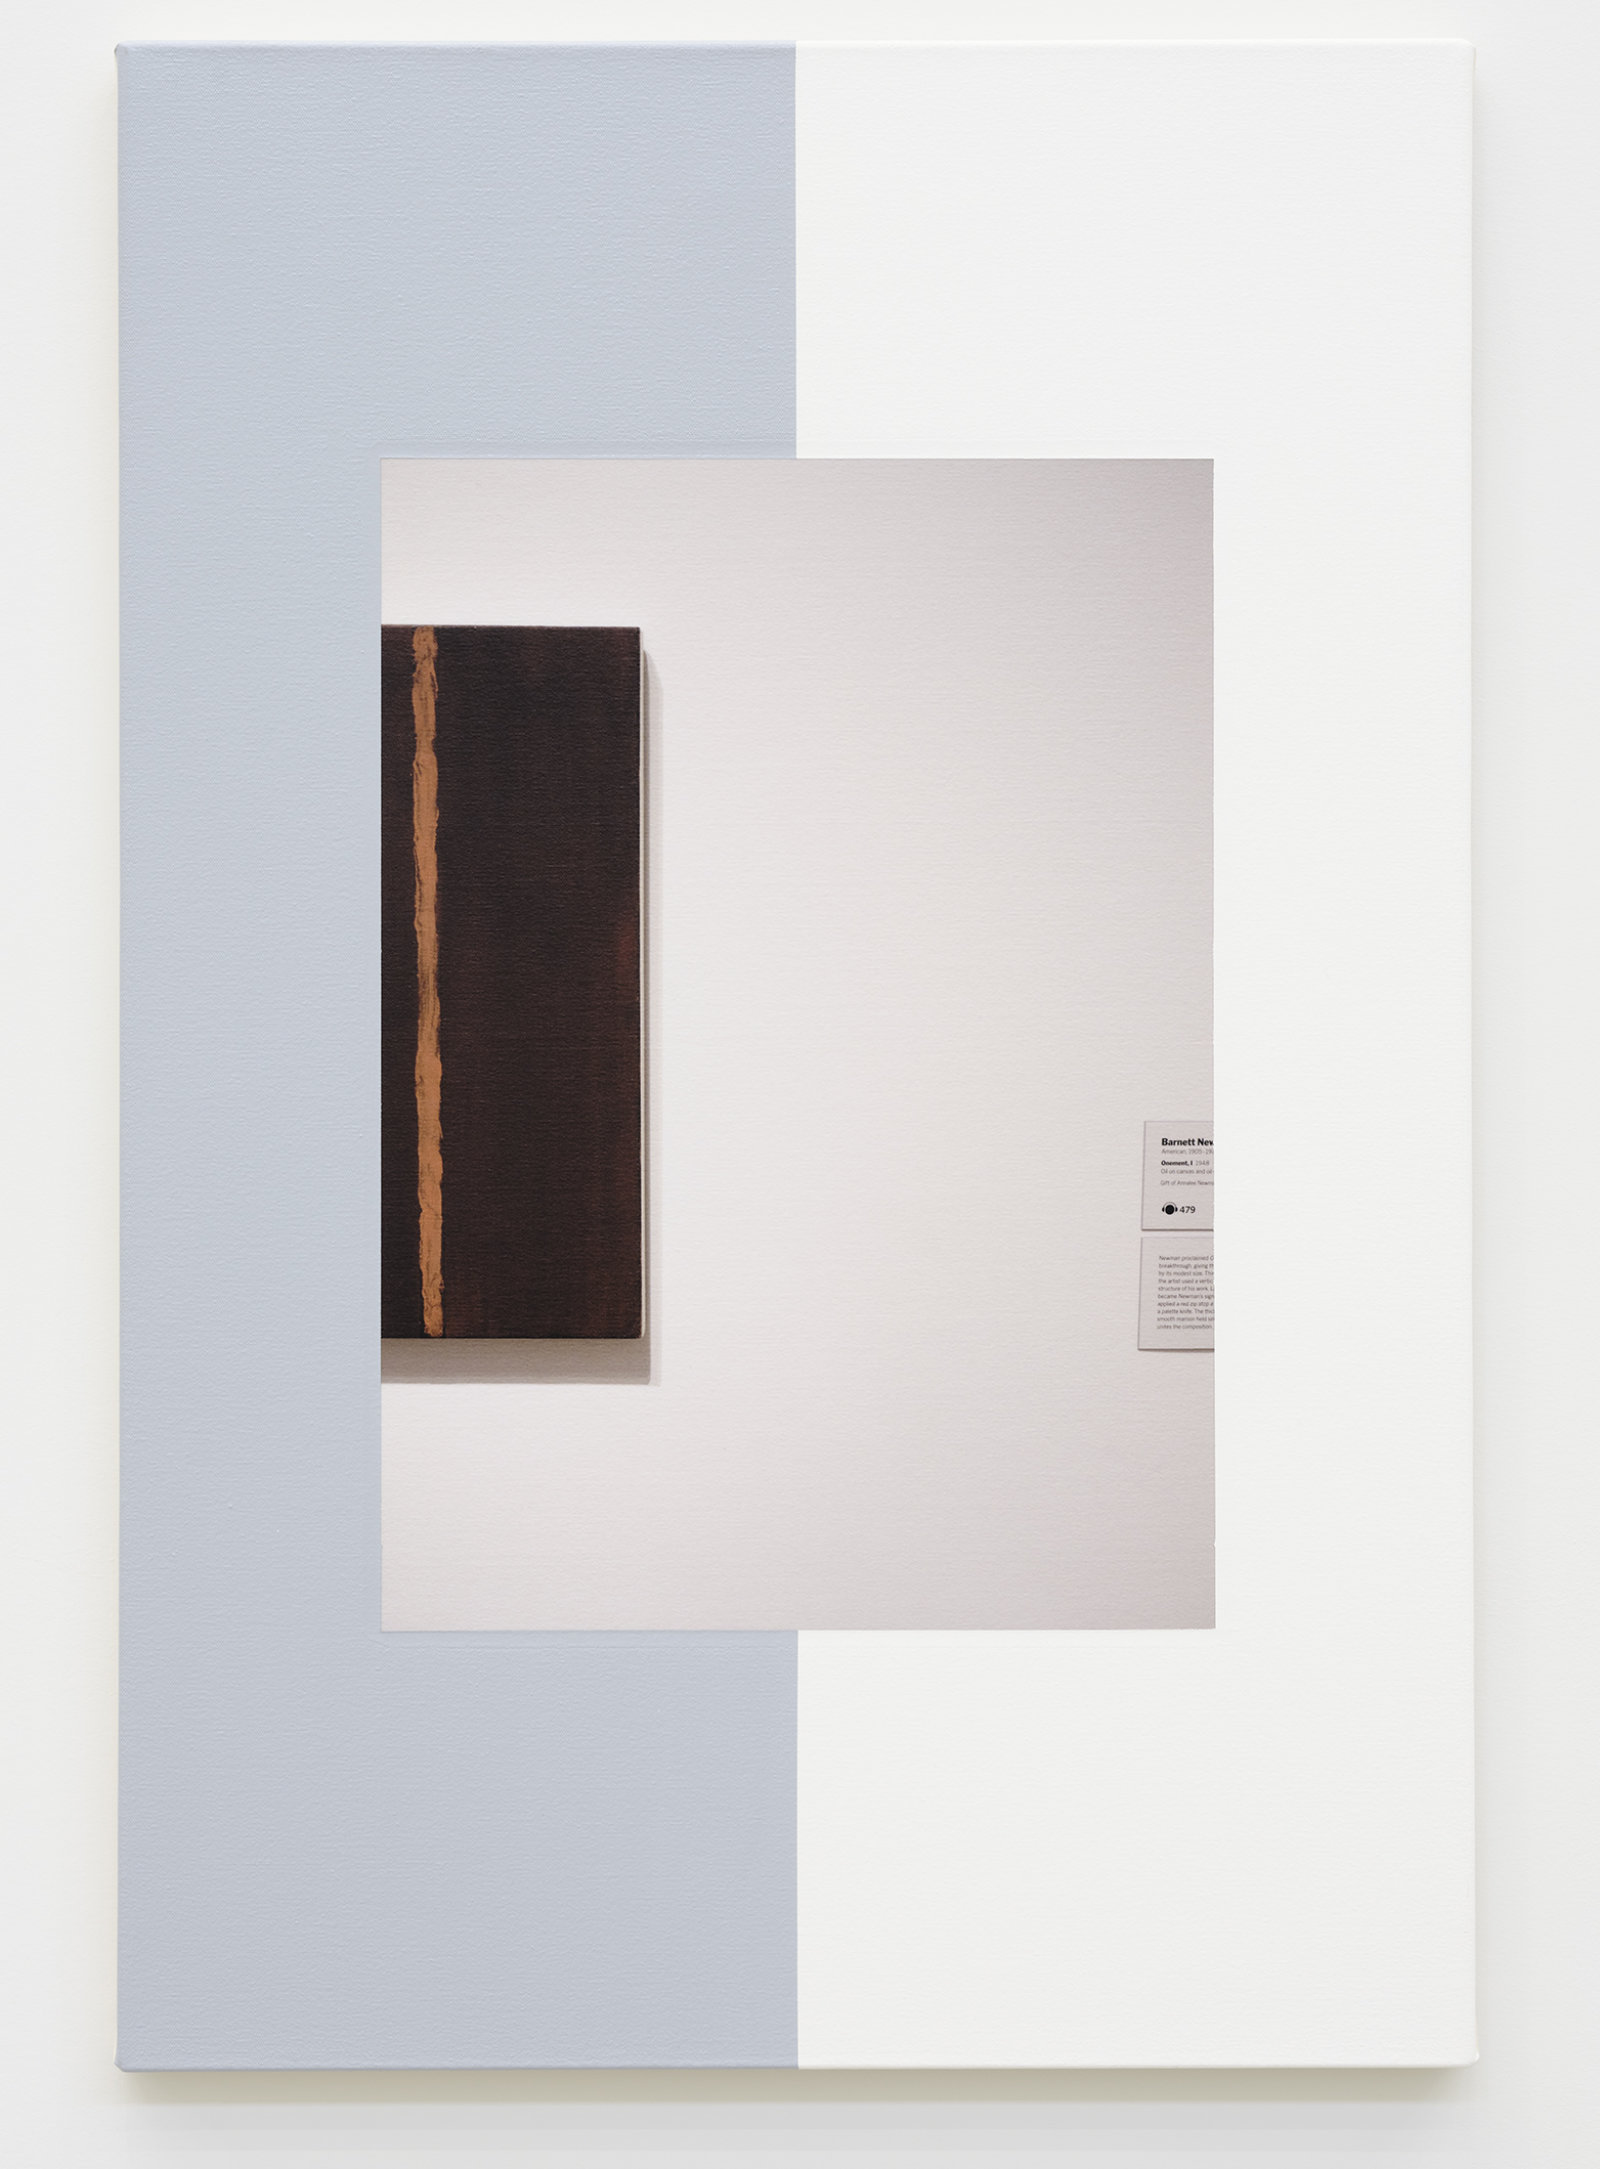 Ian Wallace, Abstract Composition (with Onement), 2011, photolaminate with acrylic on canvas, 36 x 24 in. (91 x 61 cm)